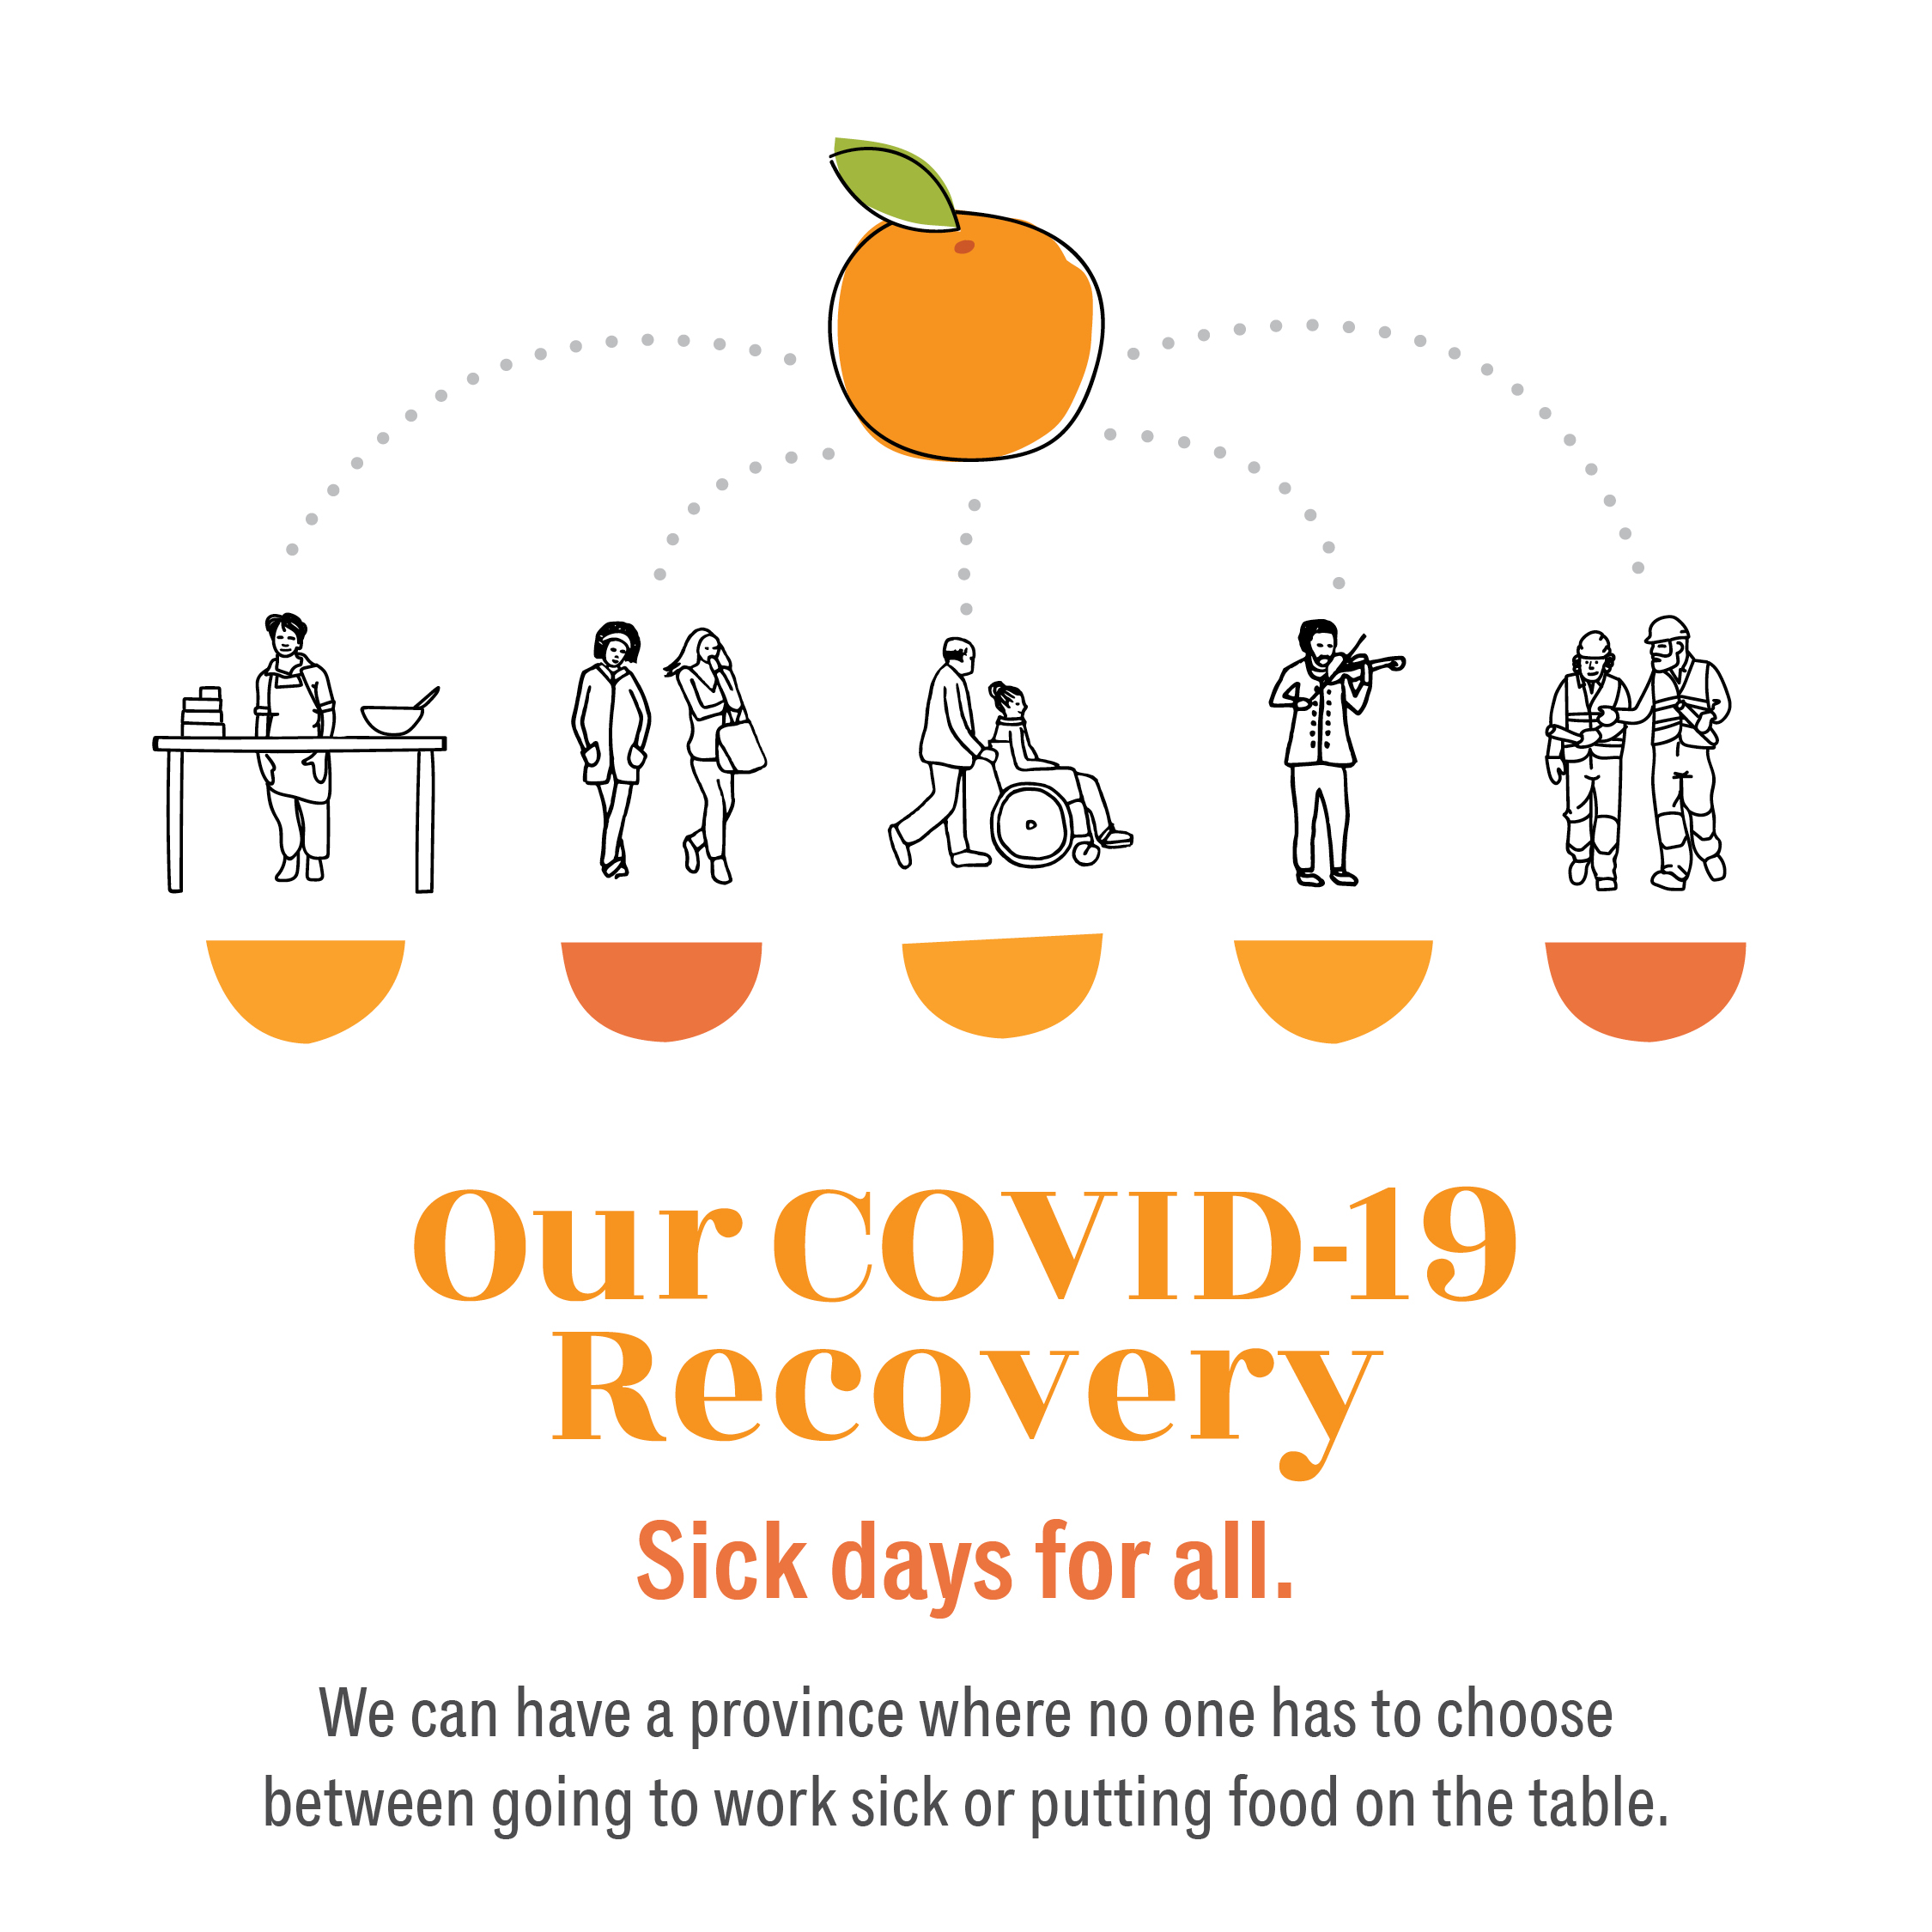 Permanent paid sick days for all workers required « Nova Scotia NDP